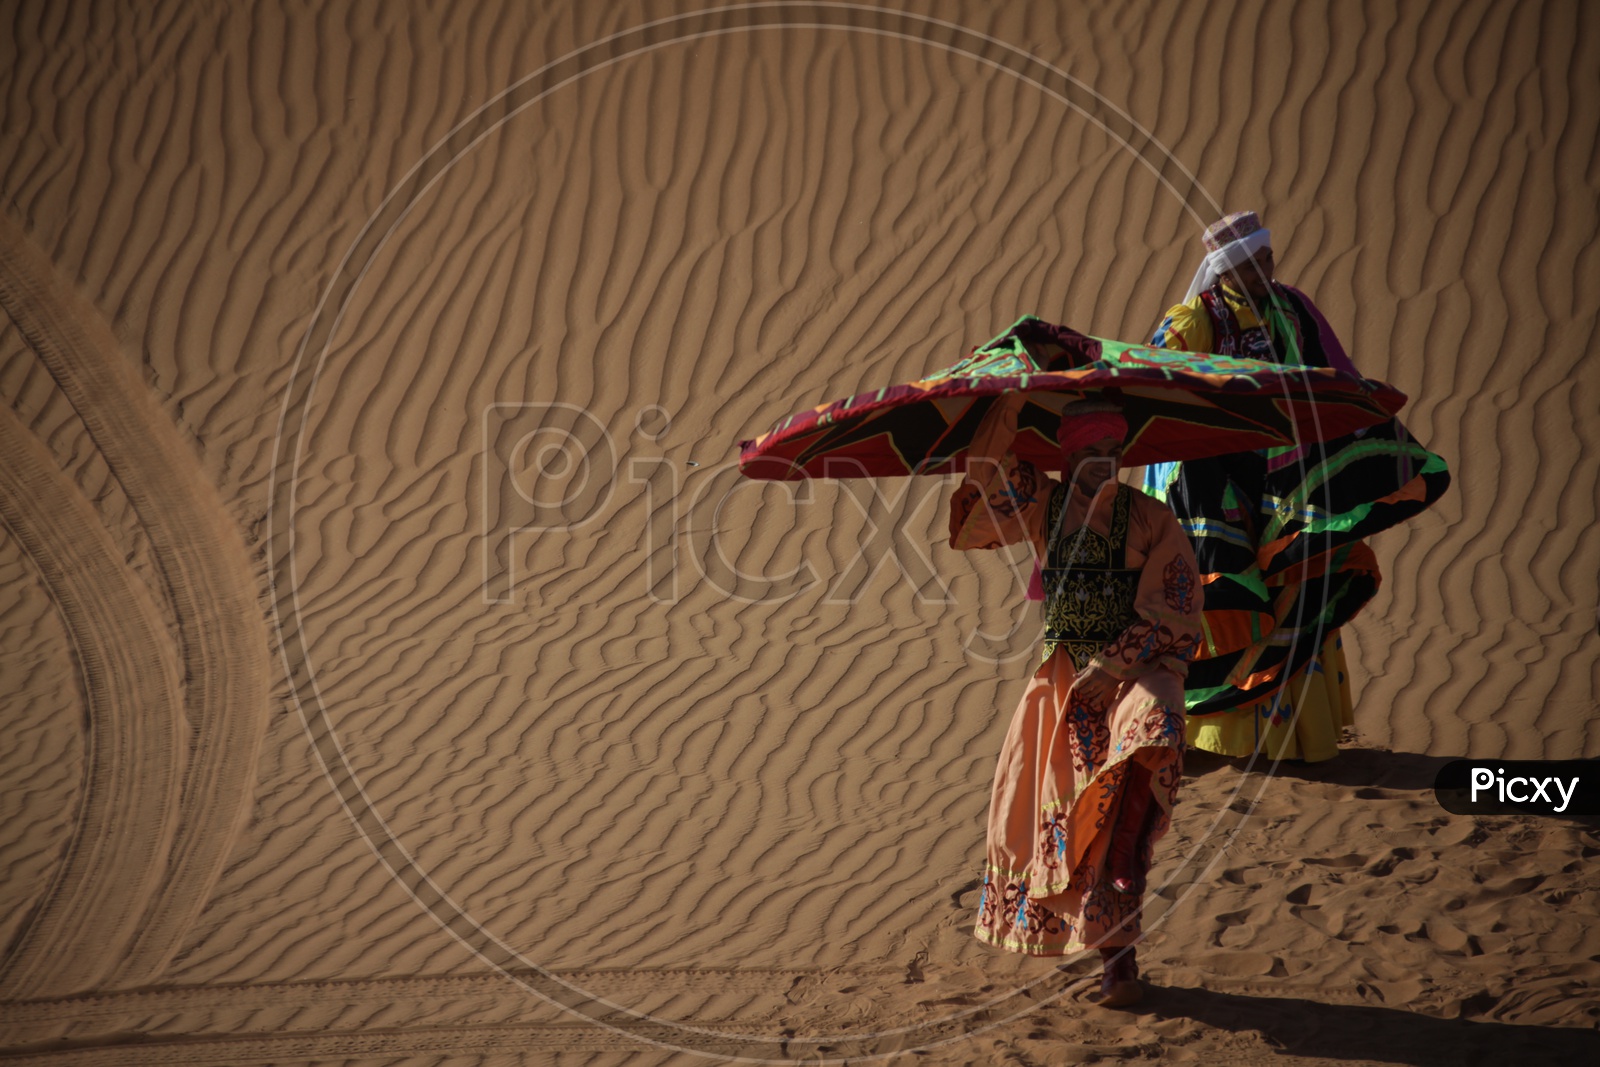 The Traditional Folk Dance Gair Artists Dancing in the Deserts of Rajasthan